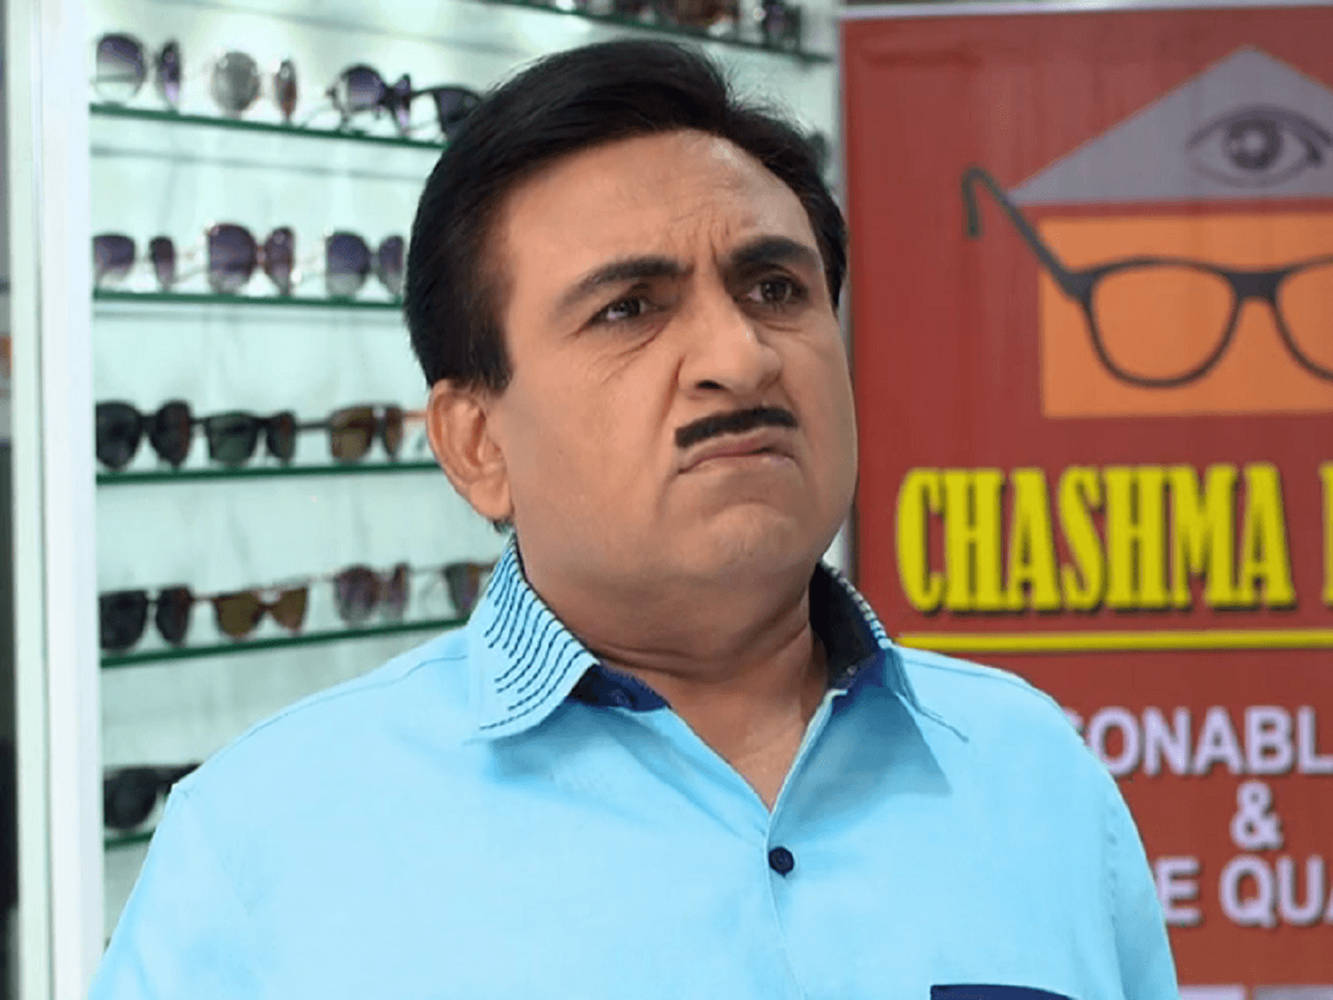 Indian Tv Character Jethalal In Light Blue Polo